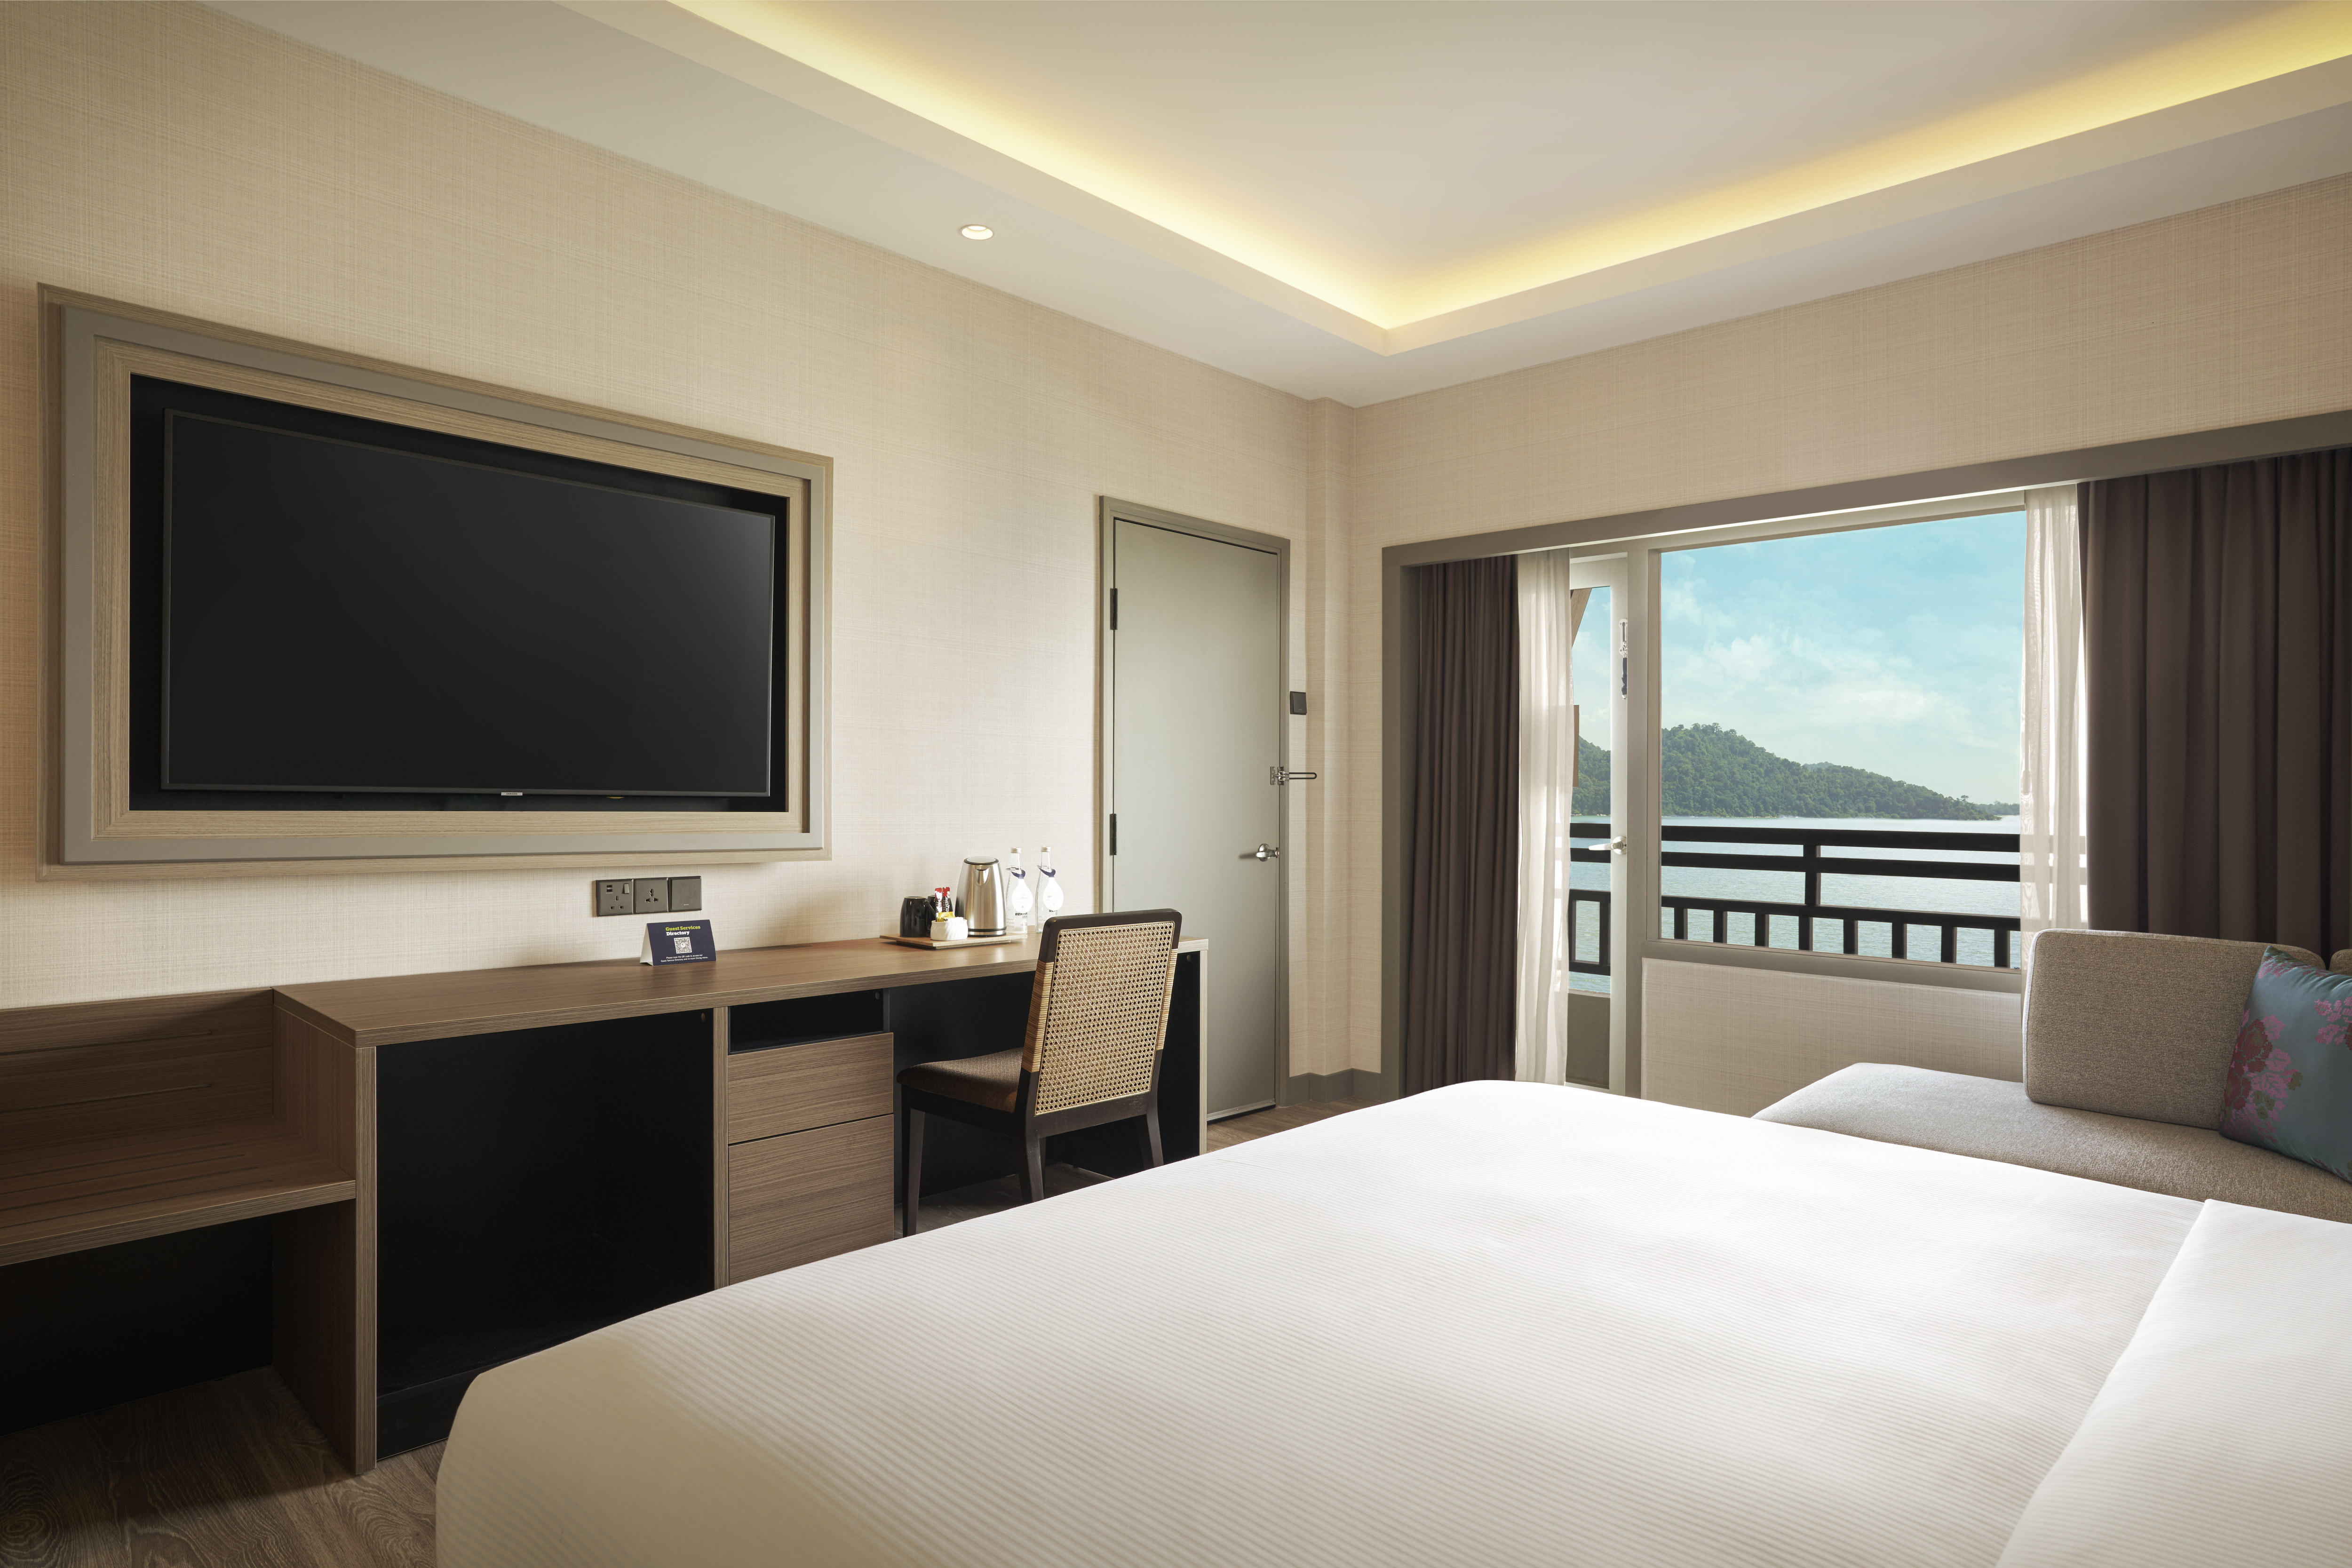 King suite bedroom with wall mounted TV and sea view